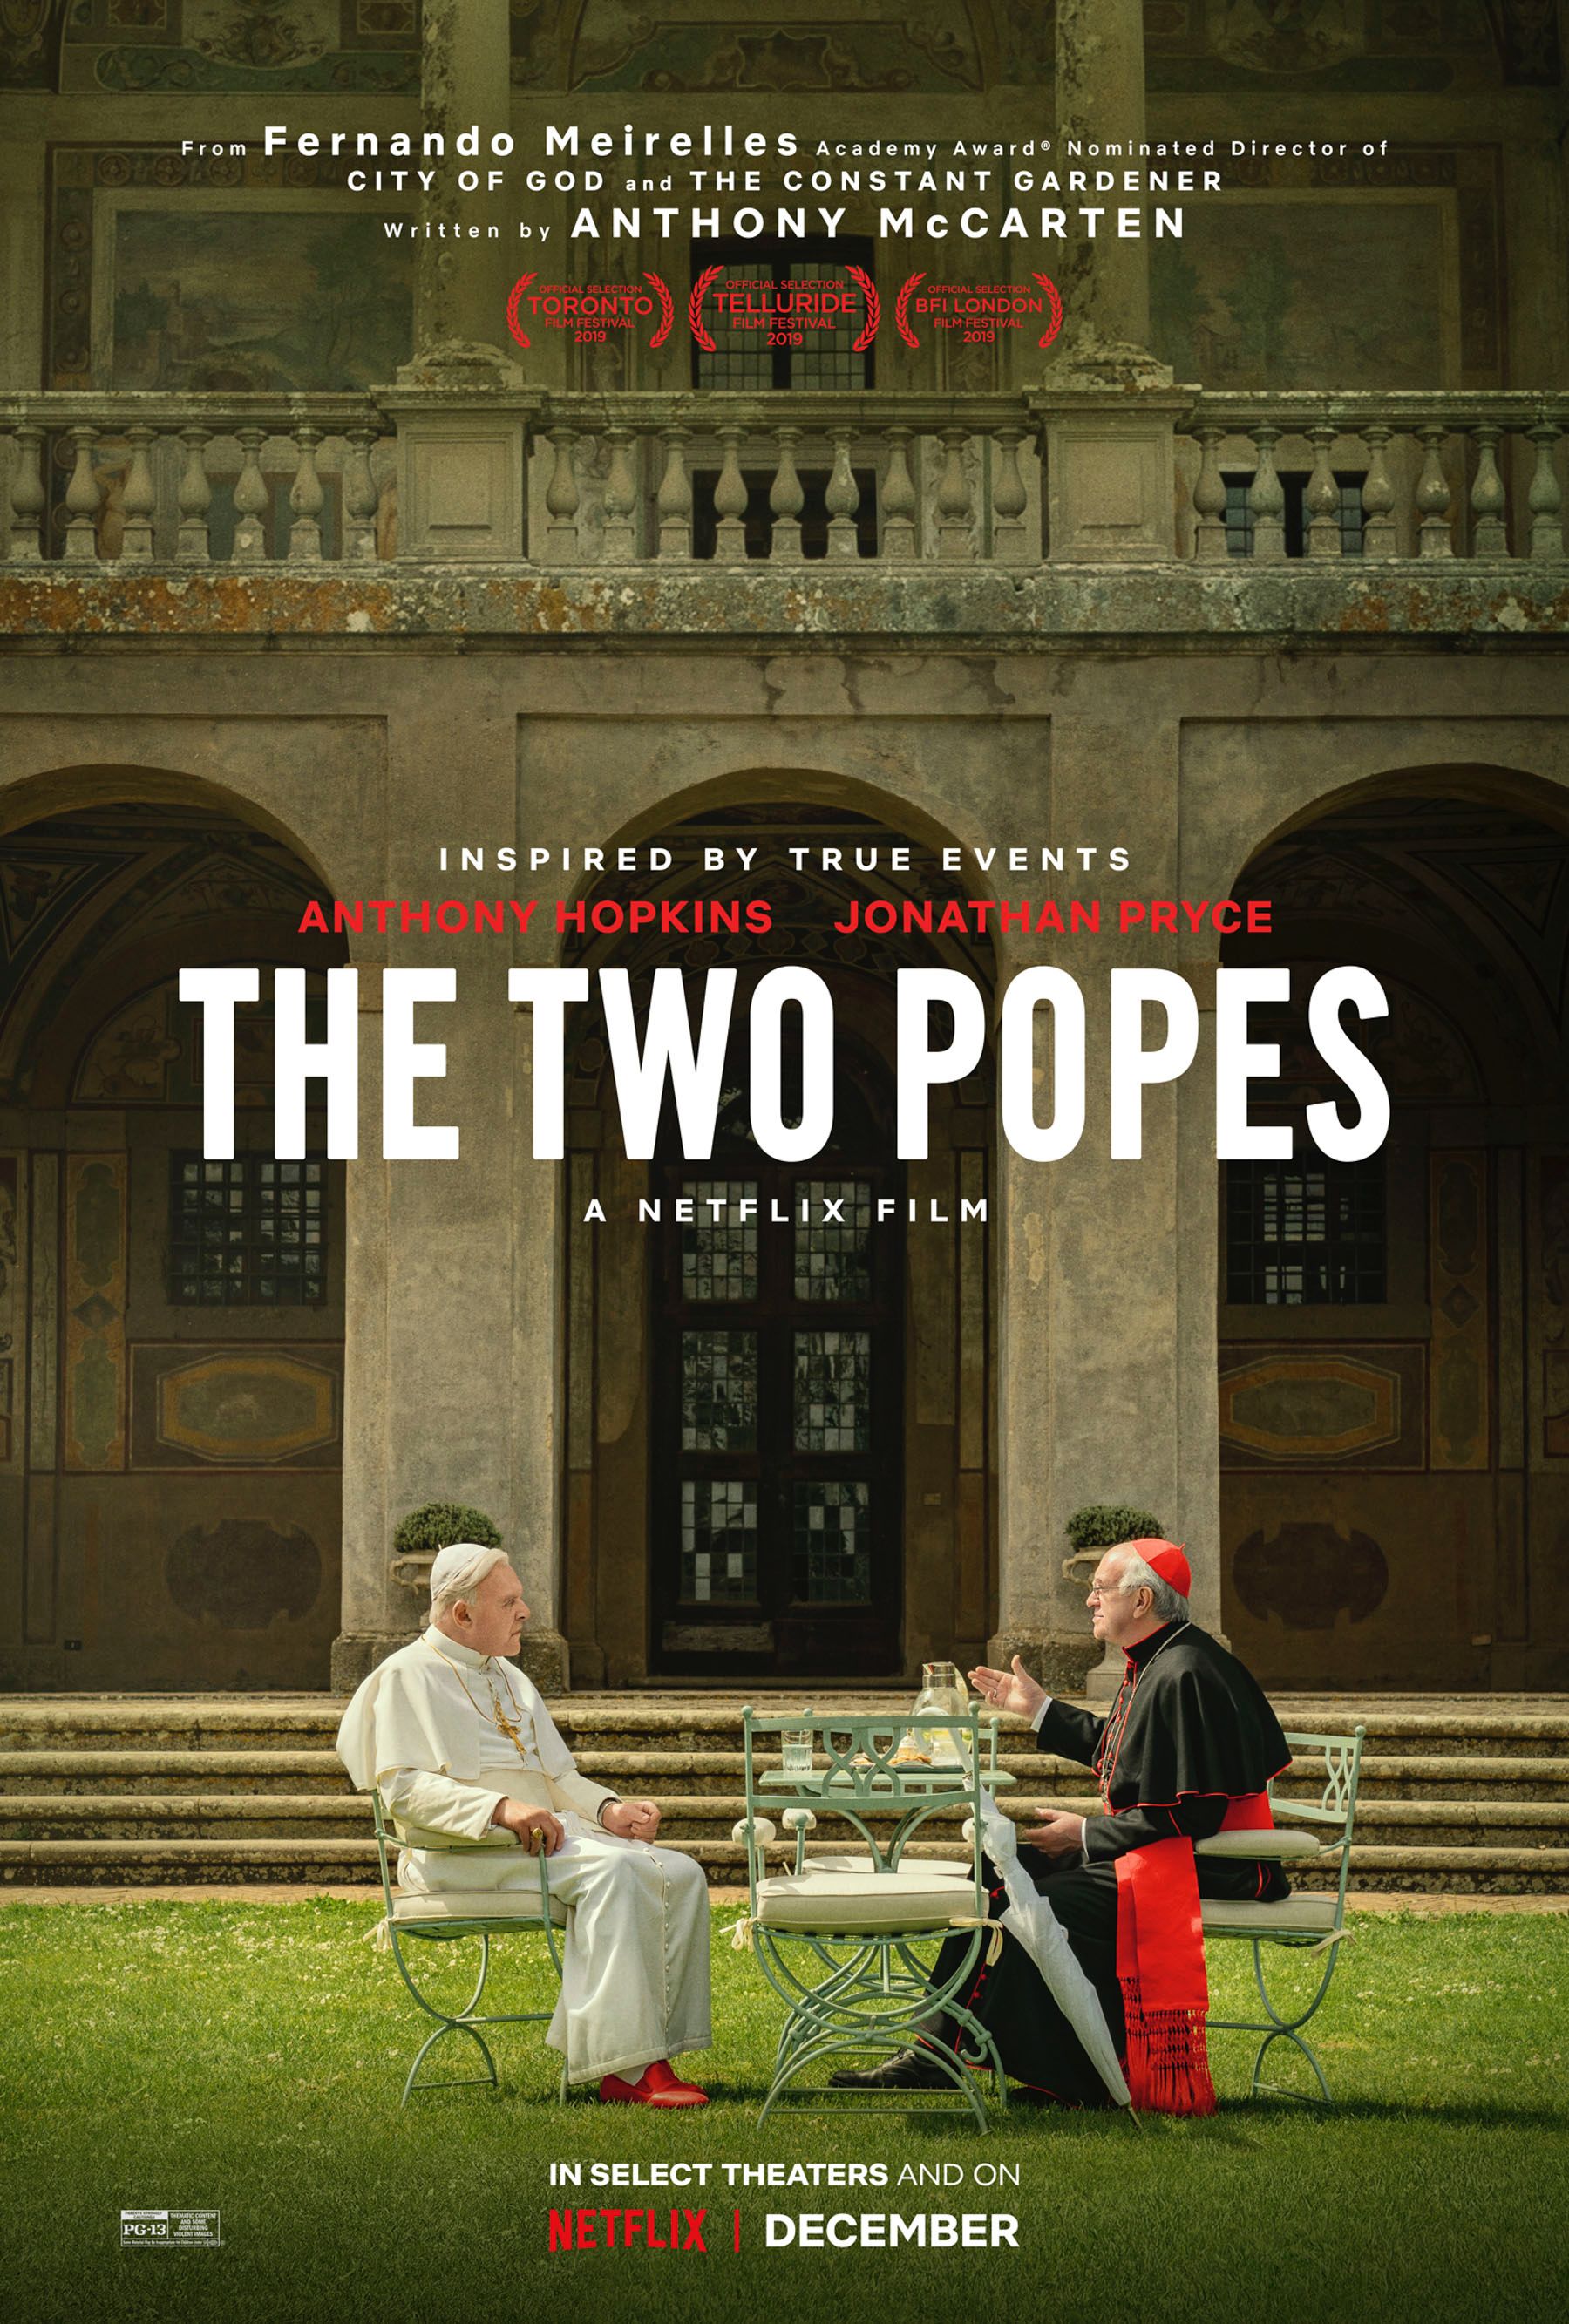 The Two Popes trailer